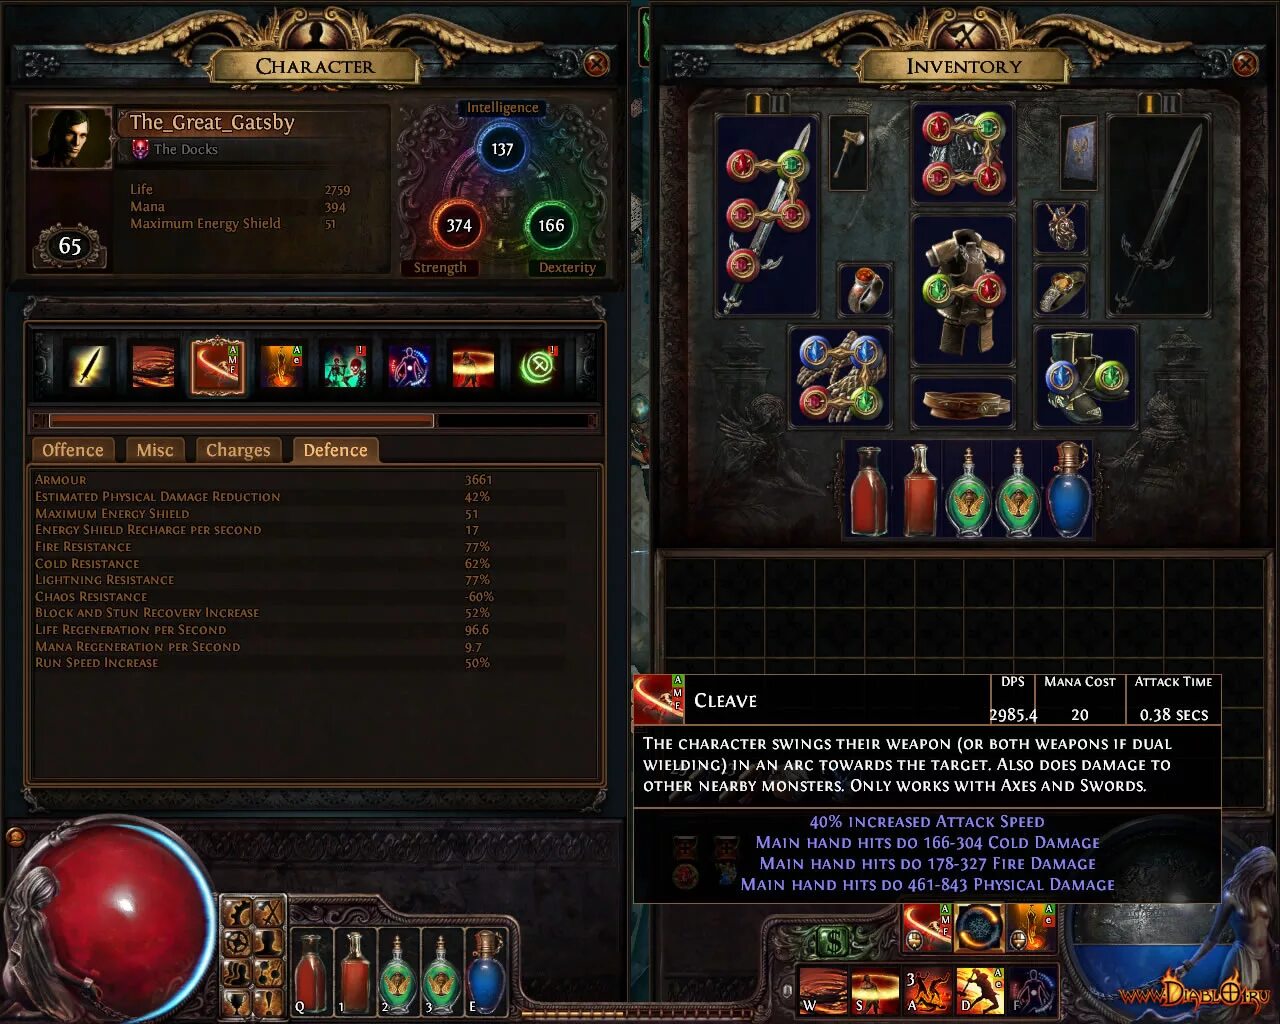 Гайд Path of Exile. Path of Exile Inventory. Сфера раскаяния Path of Exile. Reduced mana cost POE.